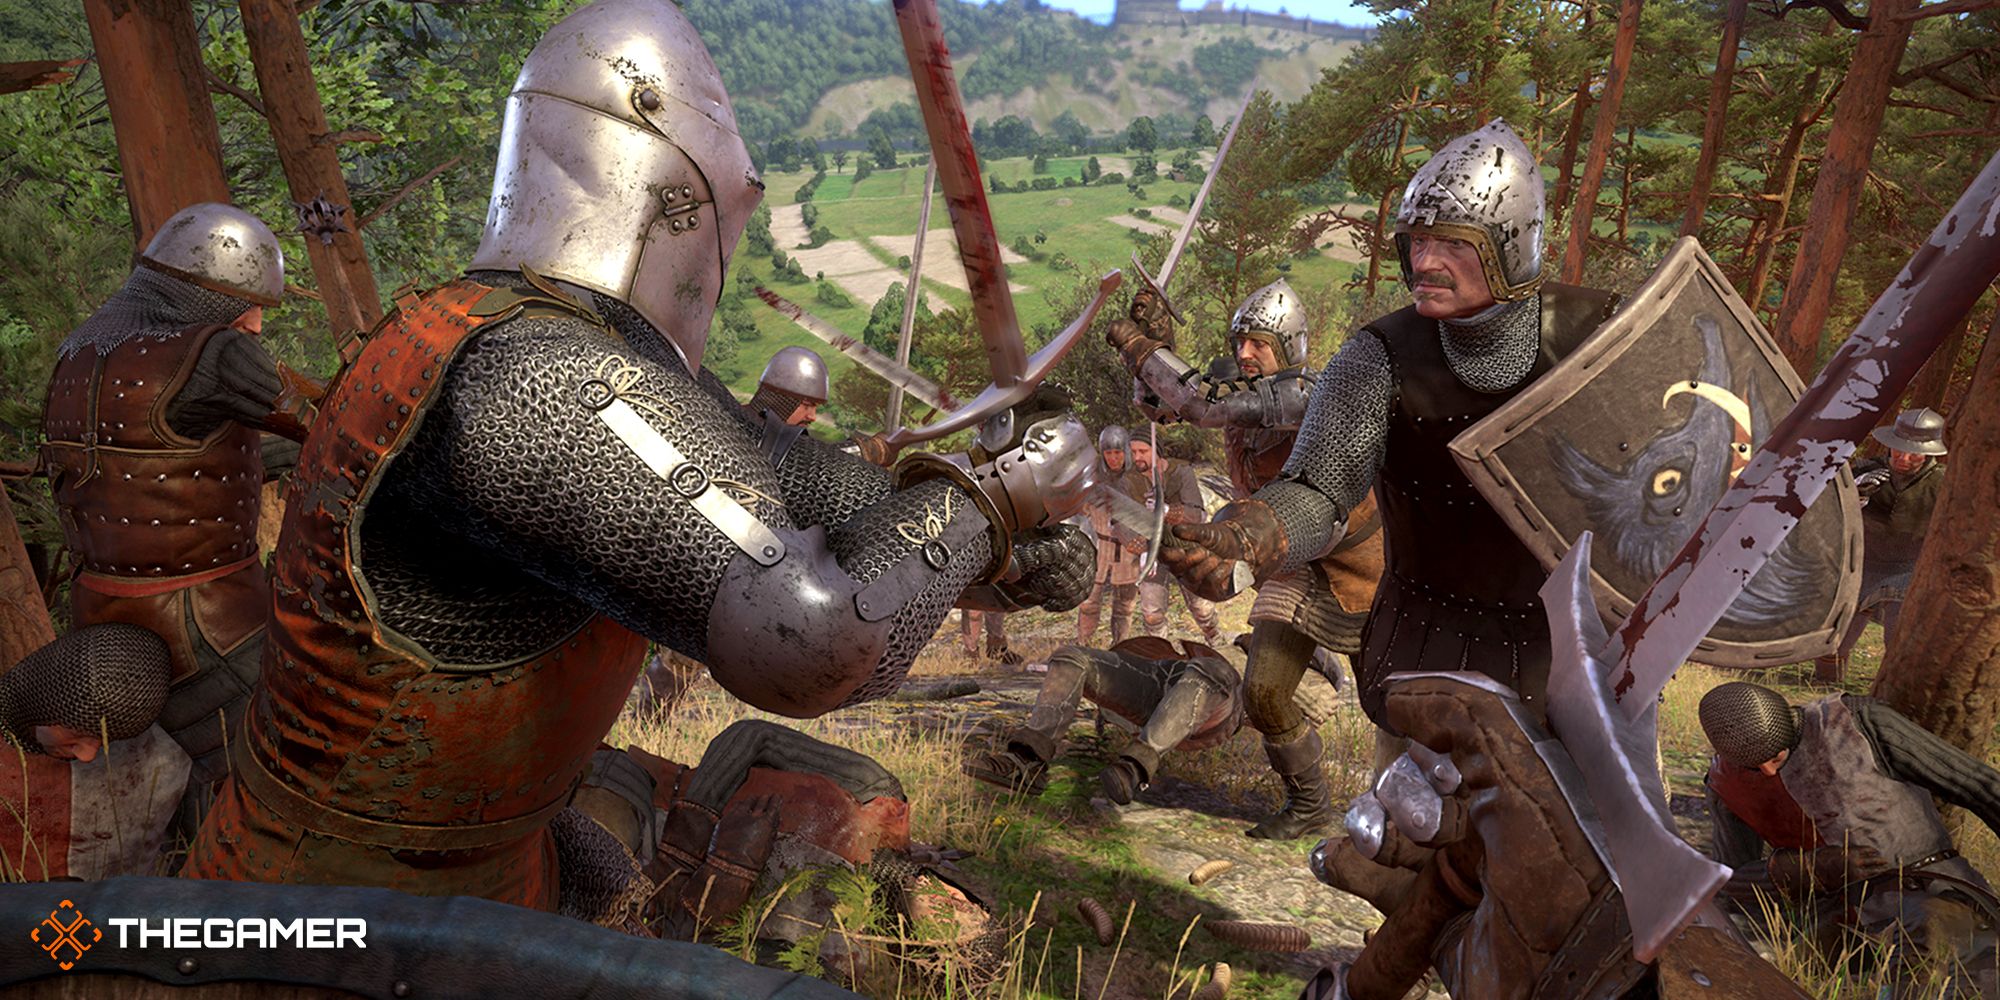 Kingdom Come Deliverance two armies fighting one another as two opposing soldiers face off.